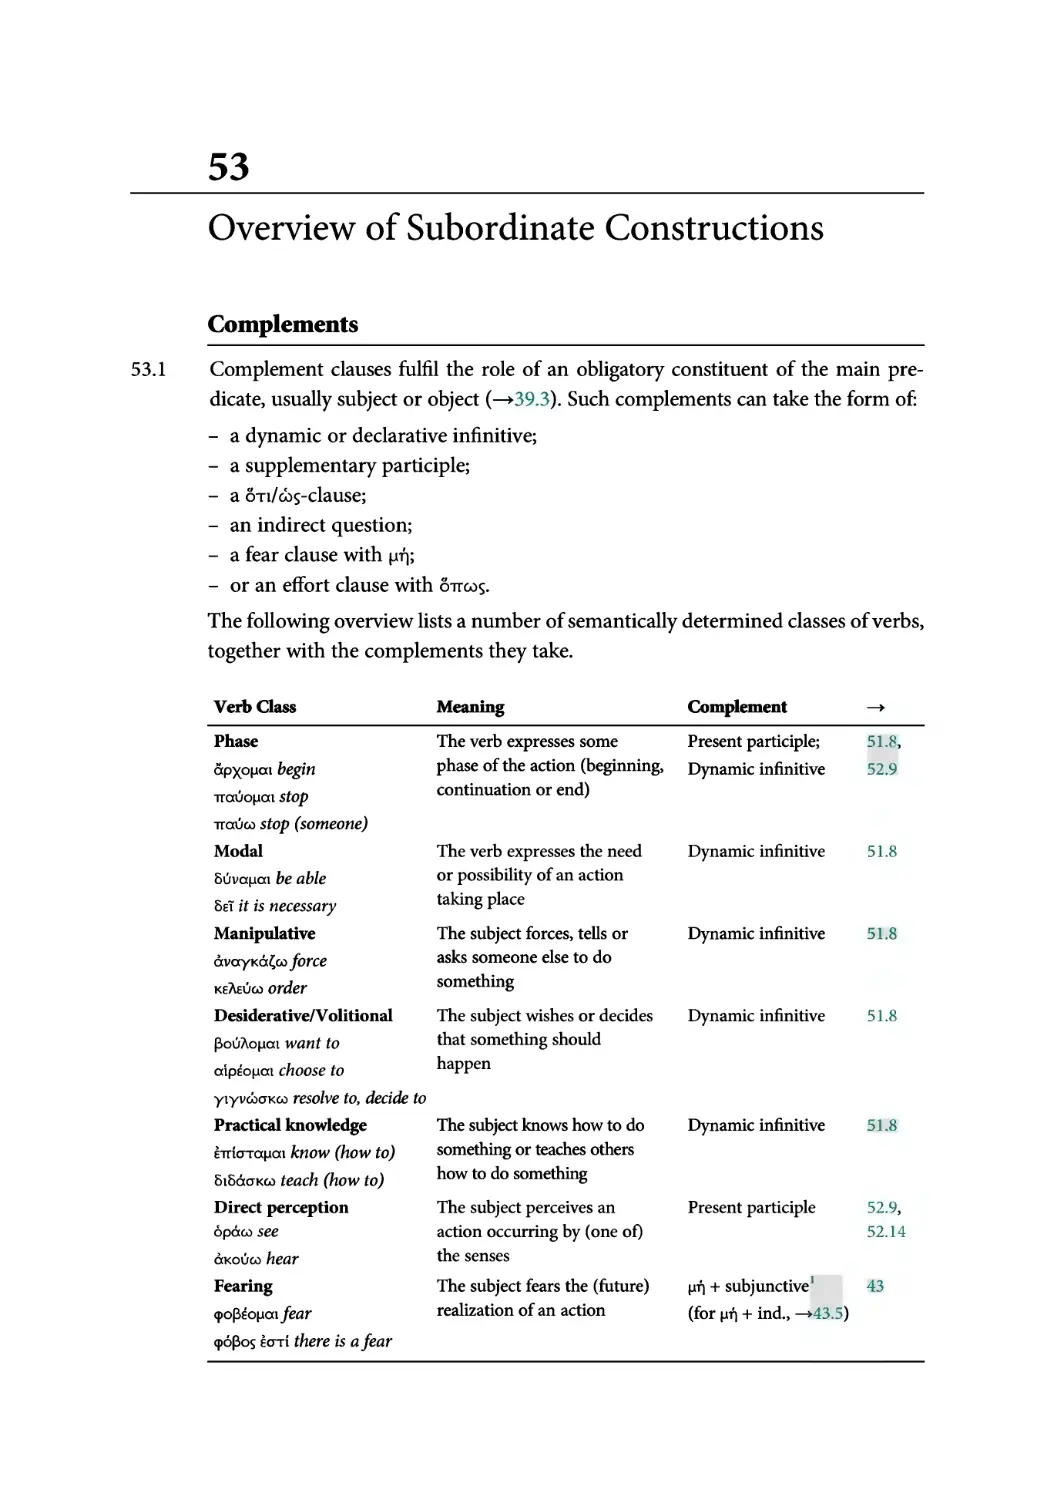 33. Overview of Subordinate Constructions